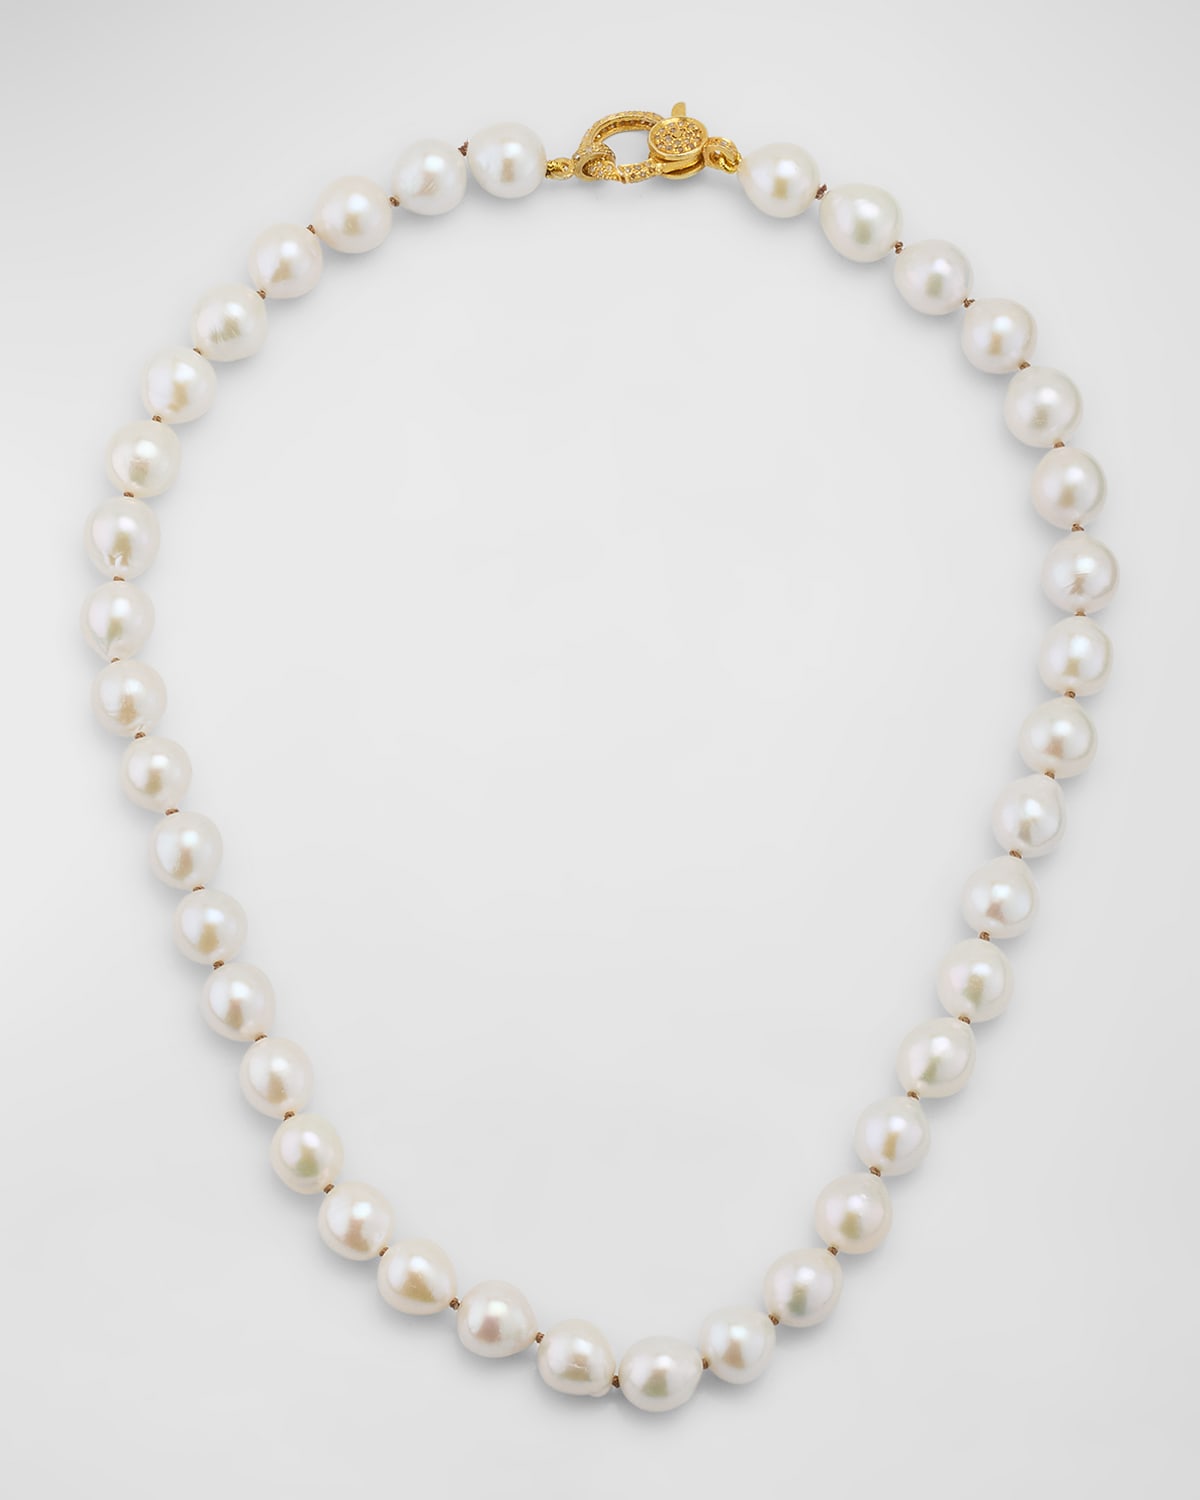 White Edison Freshwater Pearl Necklace with Diamond Clasp, 18"L